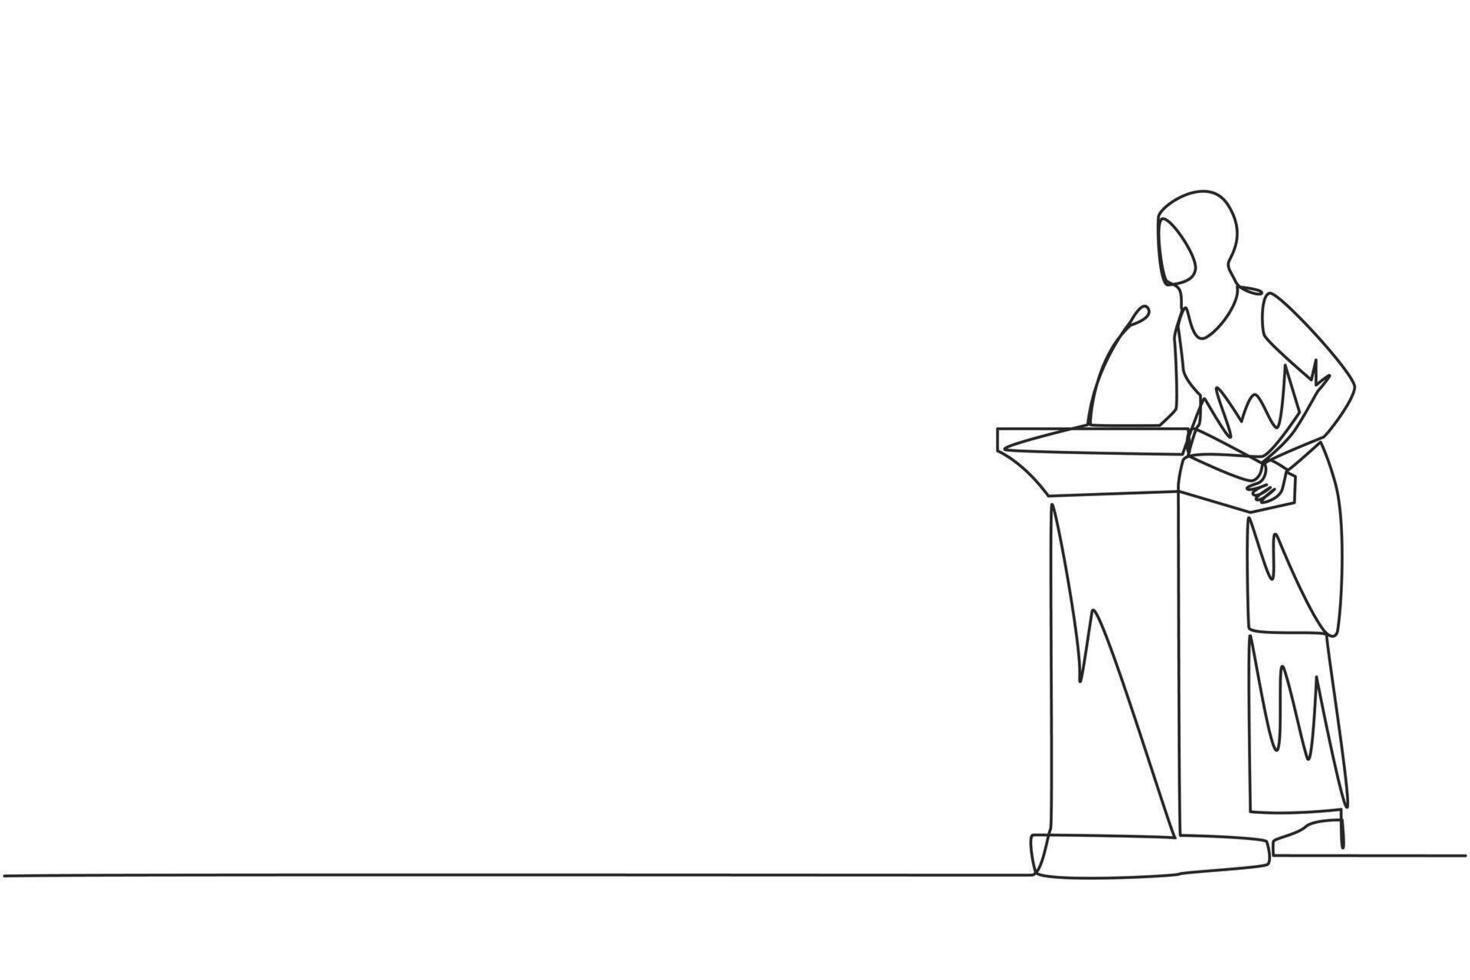 Continuous one line drawing Arabian businesswoman speech standing at the podium. Give oration that women can be more independent. Encourage through words. Single line draw design vector illustration